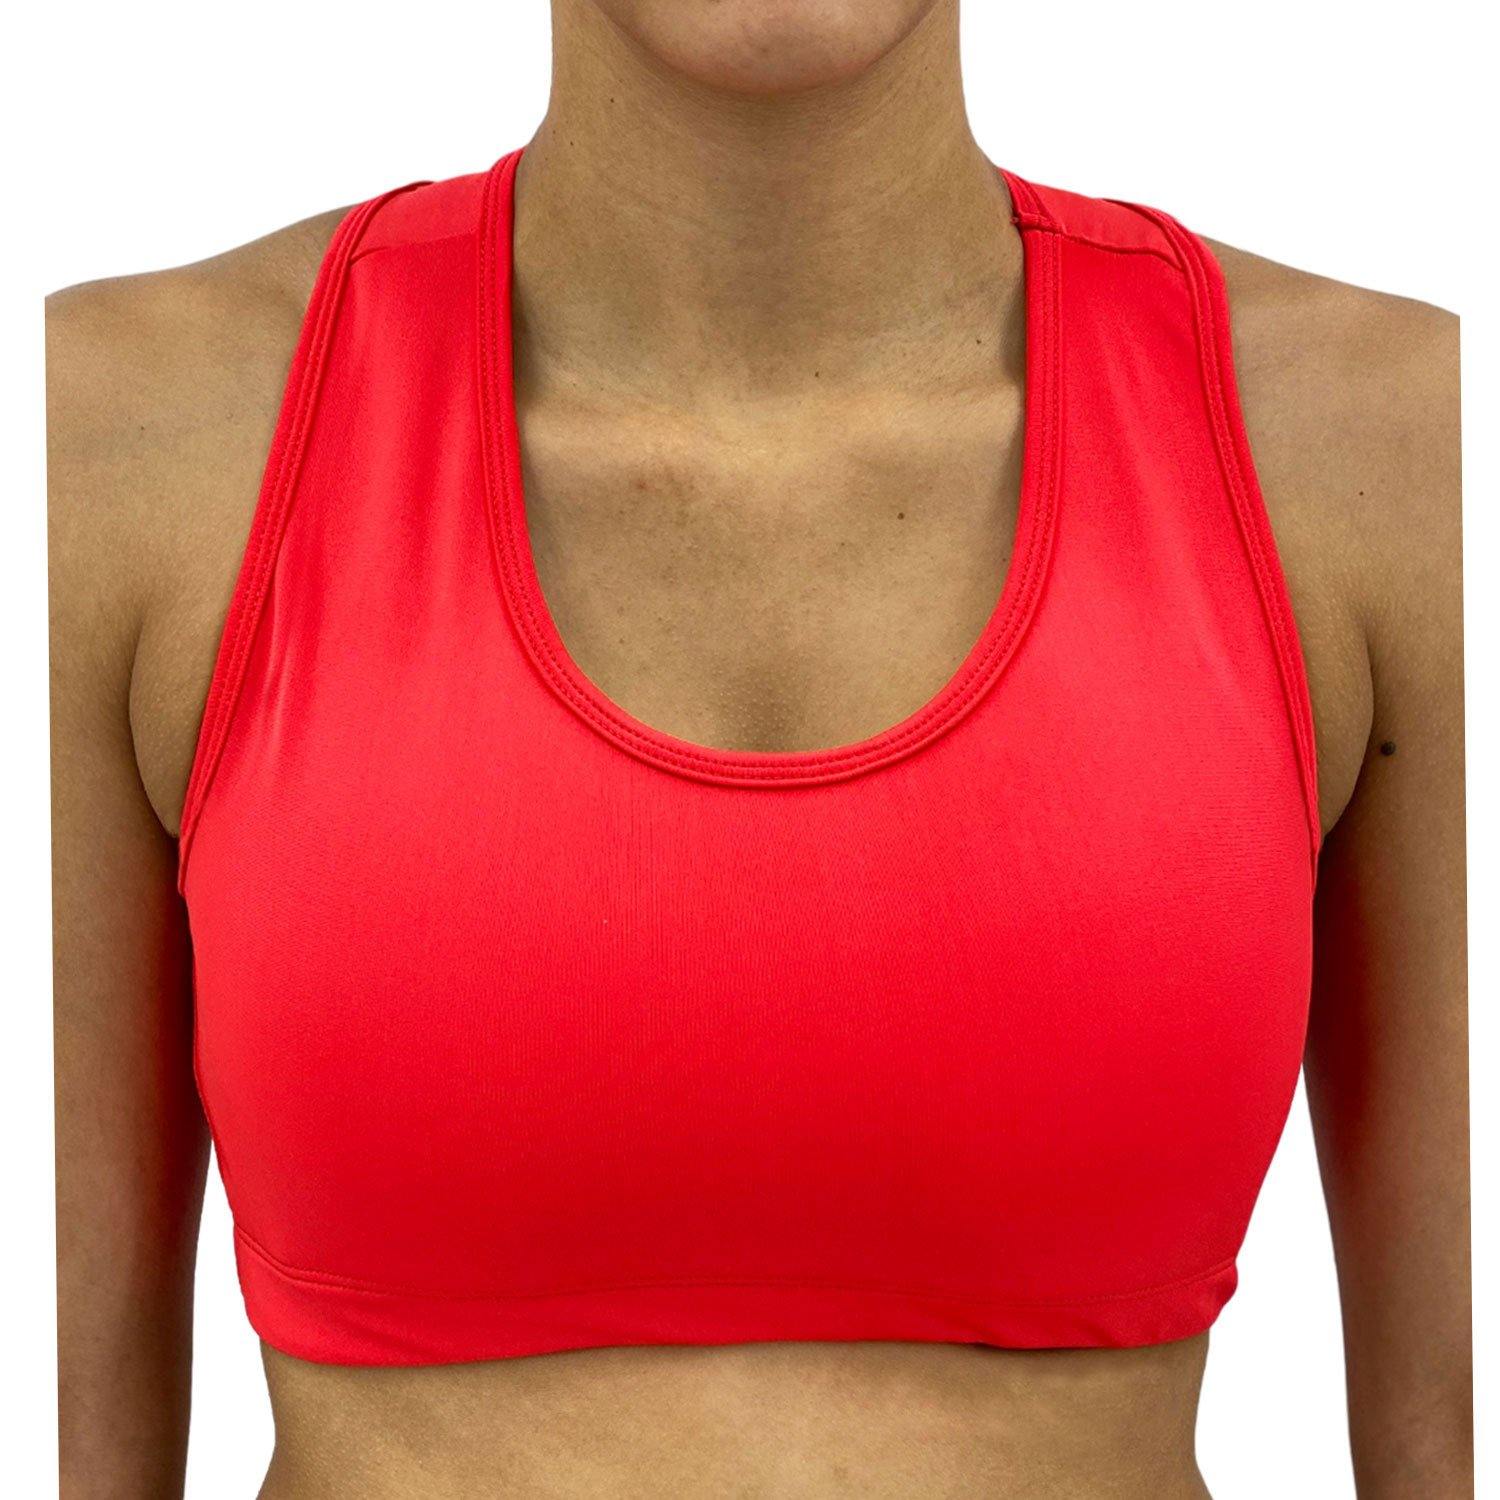 Candy Apple Solid Color Sports Bra - USA Made Dropship